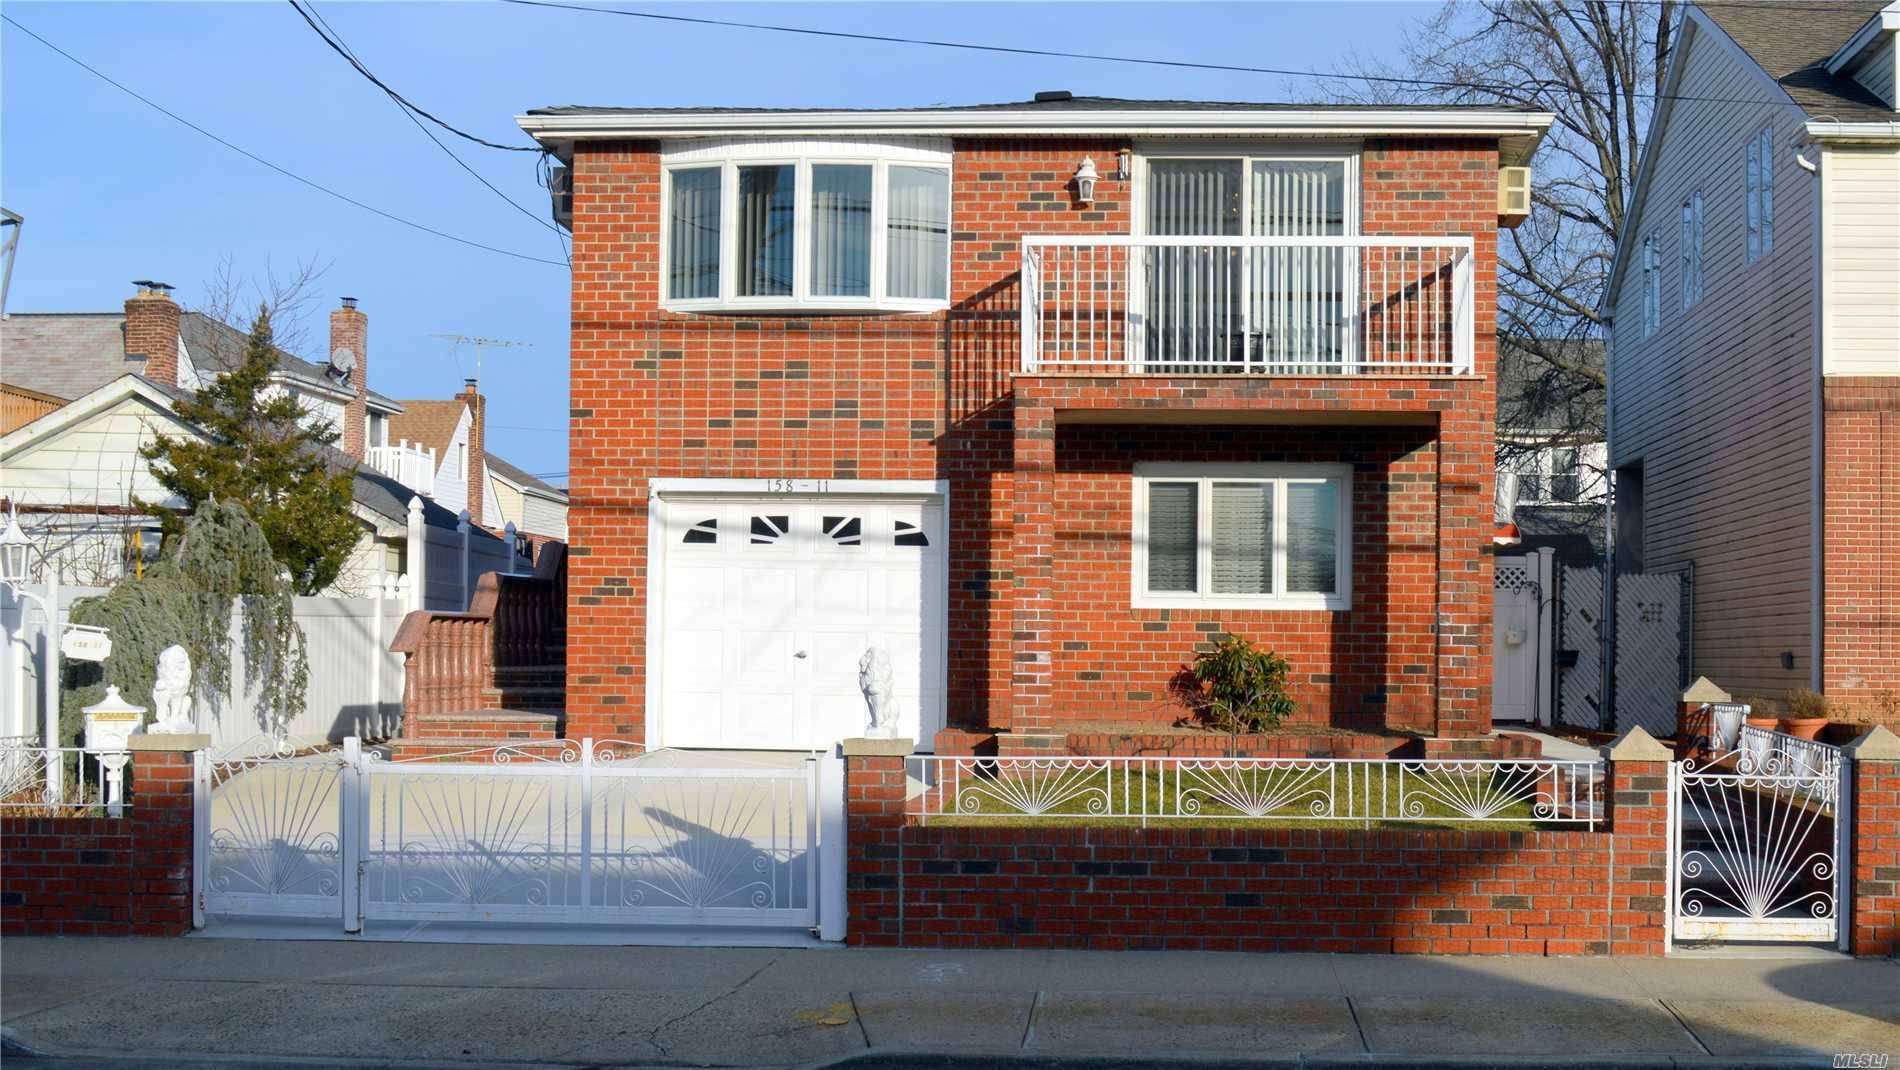 Must See ! Immaculate Brick 2 Family Built In 1982 With Brand New Granite Entrance Stairs.